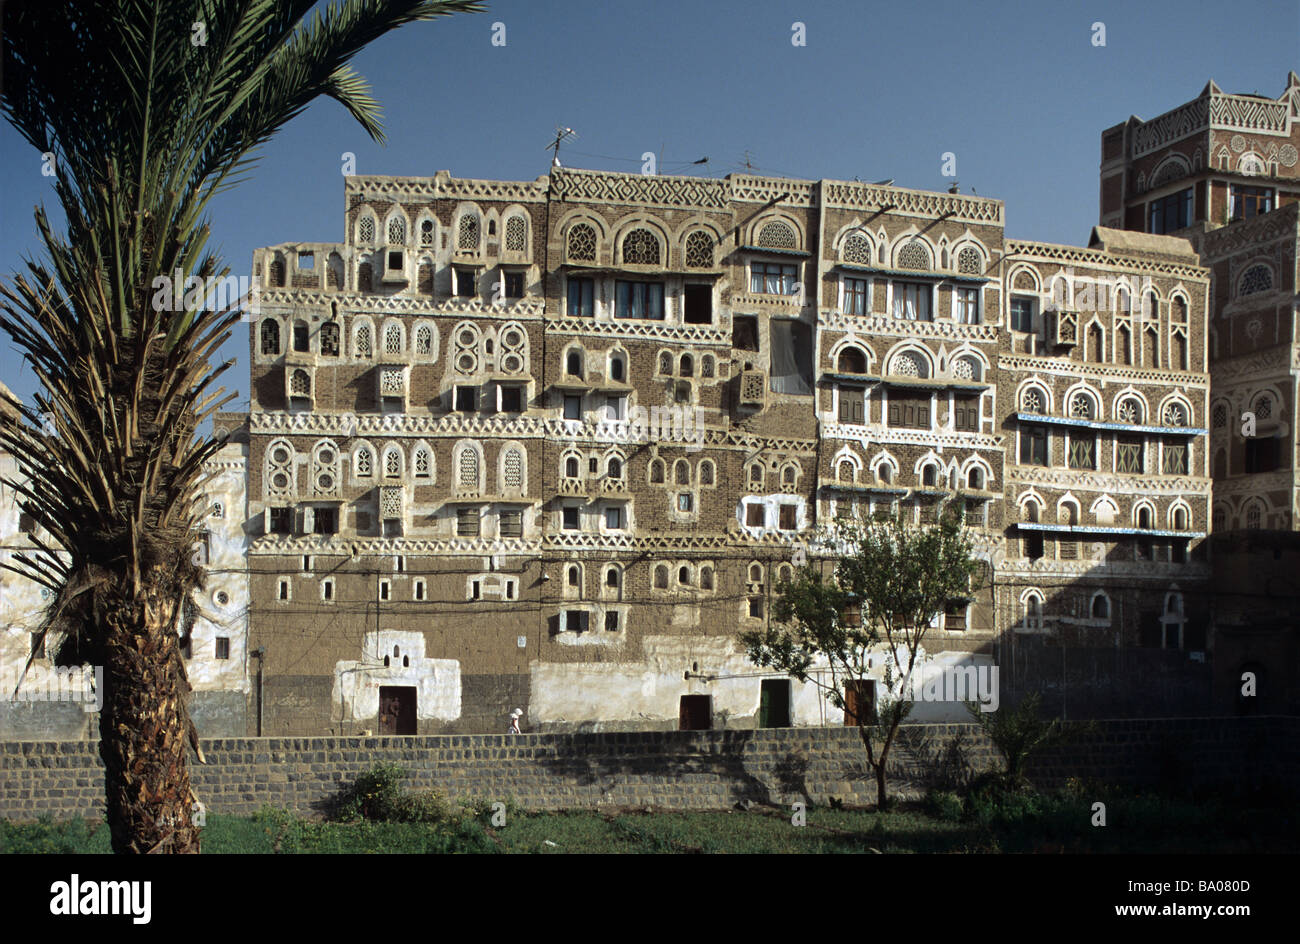 Adobe Mud Brick High-Rise Tower Houses with Decorated Windows, Sana'a or San'a, Capital of the Republic of Yemen Stock Photo